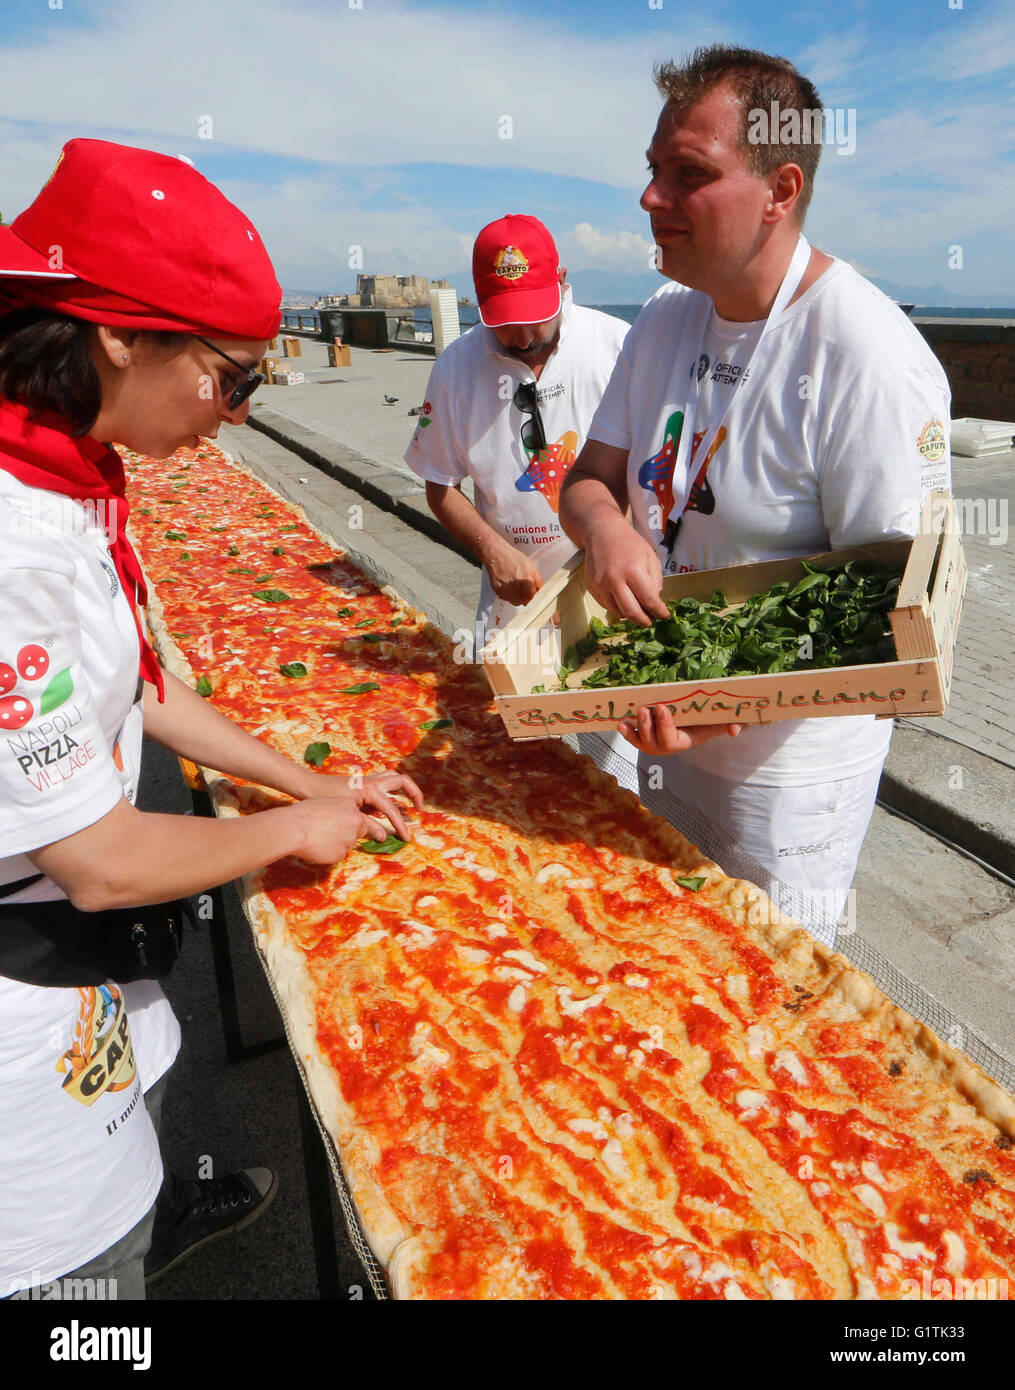 Naples, Italy. 18th May, 2016. Pizza makers attemps to break the world record of the longest pizza in the world on seafront of Naples 18 may 2016  to make it the 1,8 kilometers of baked wood-fired pizza for which were used: 2,000 kg of flour, 1600 kg of tomatoes, 2,000 kg of mozzarella, 200 liters of oil and 1500 liters of water. Credit:  agnfoto/Alamy Live News Stock Photo